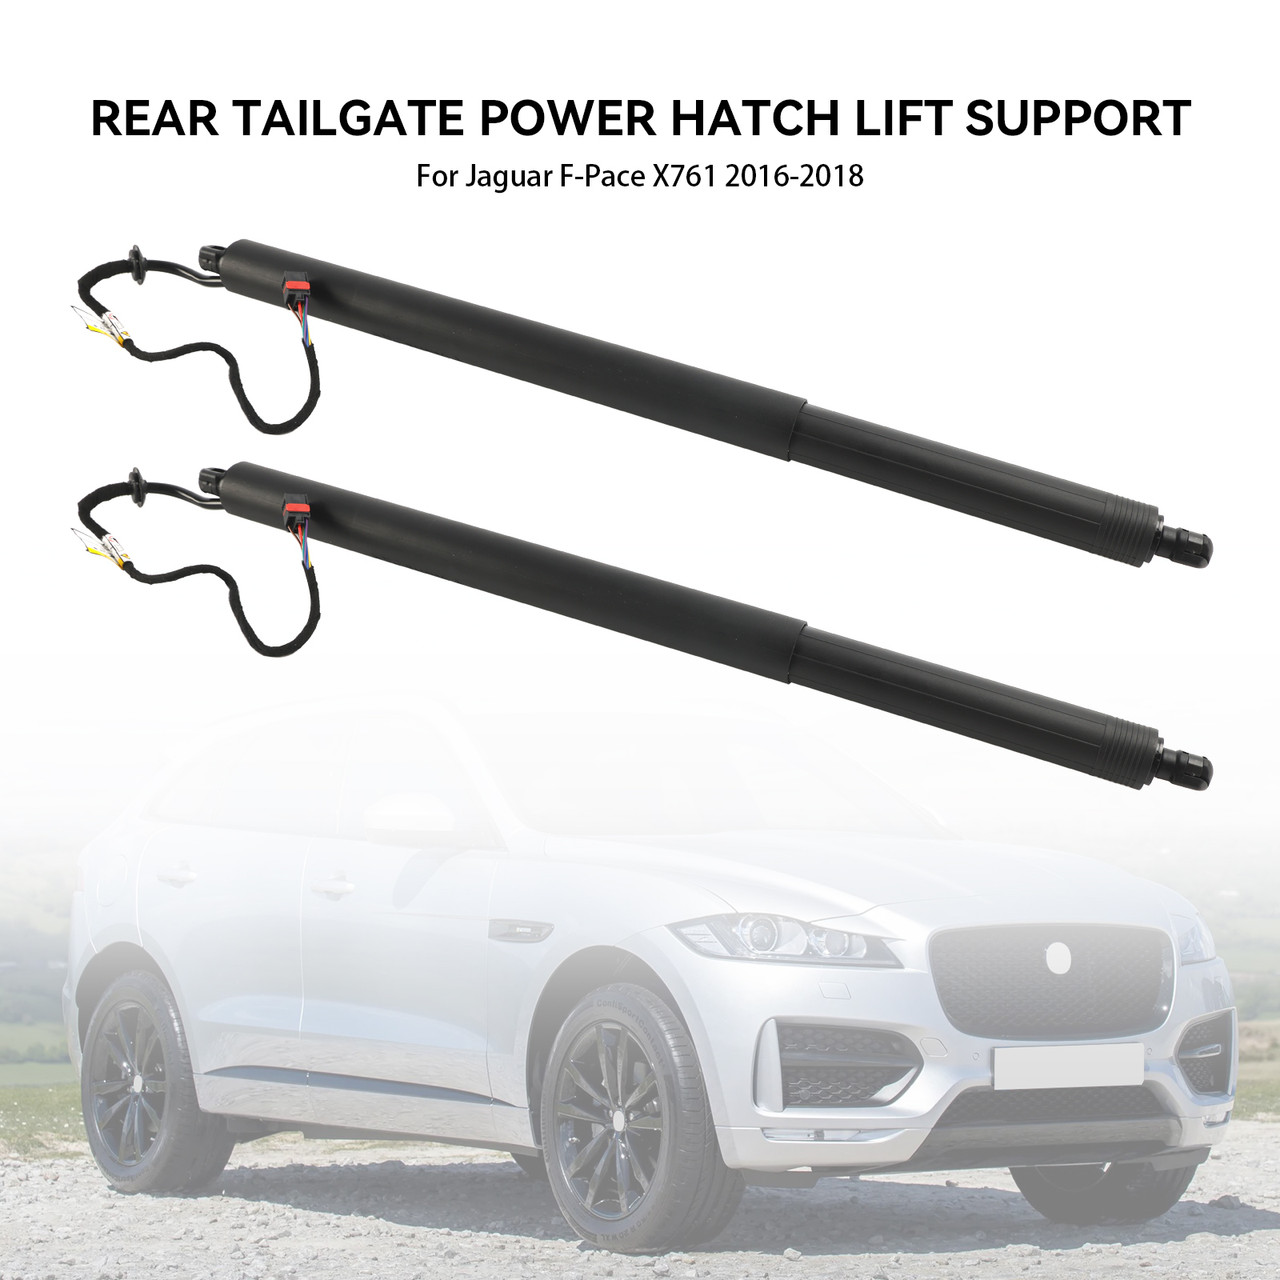 2016-2018 Jaguar F-Pace X761 left and right Rear Tailgate Power Hatch Lift Support HK8370354AA, T4A1144, T4A34990, HK83-70354-AA, HK8370354AA, HK83-70354-AA,black Generic